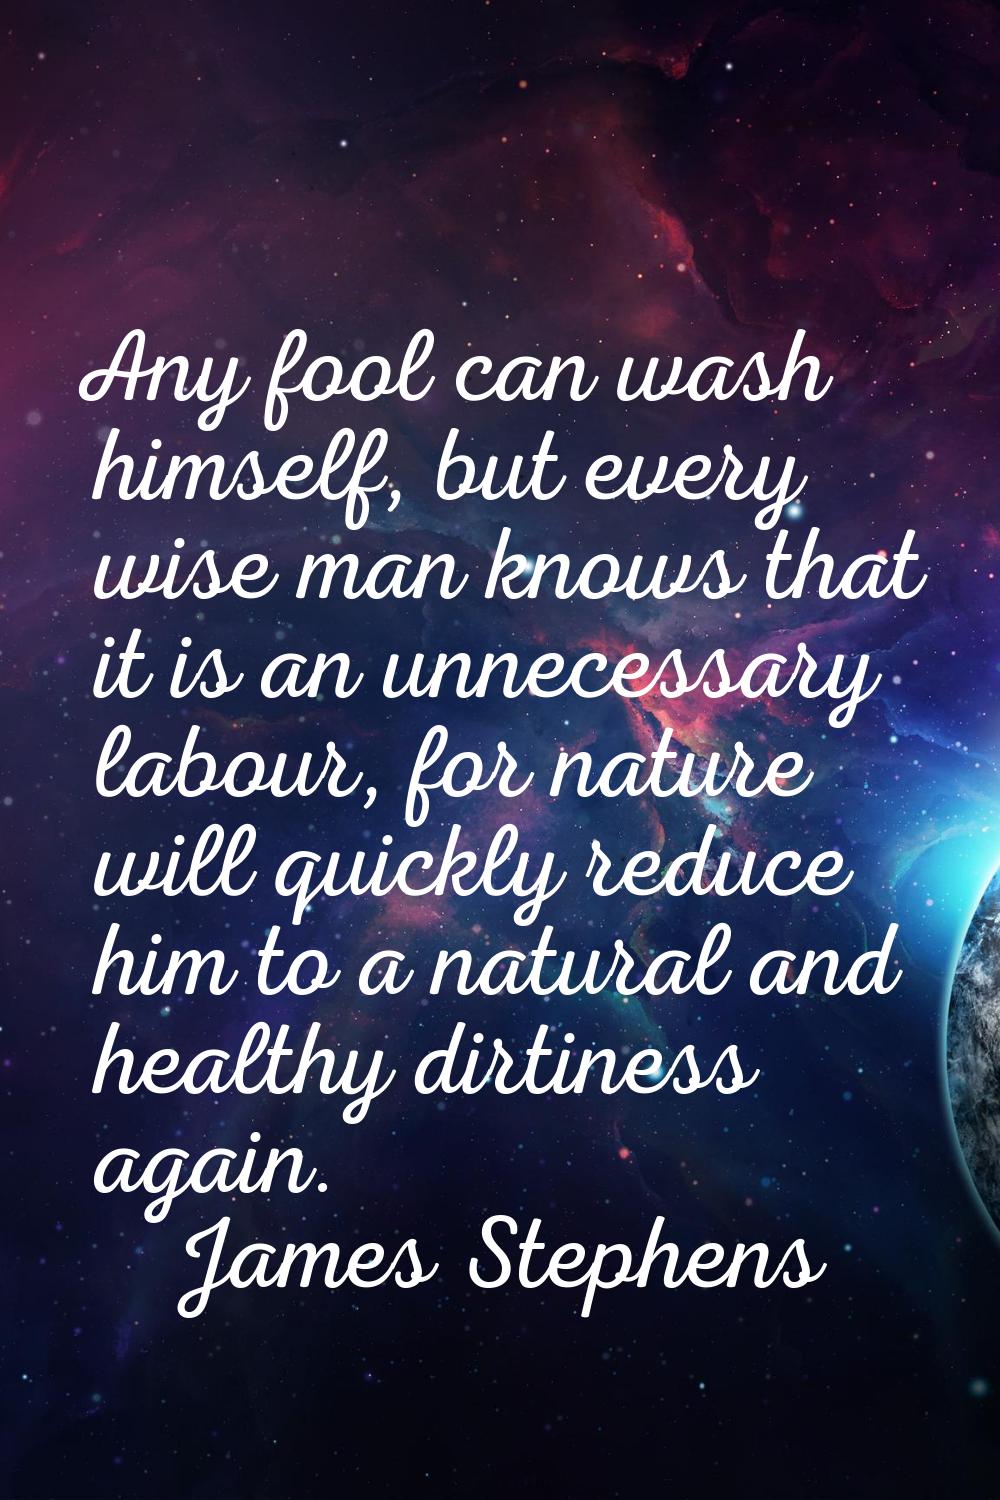 Any fool can wash himself, but every wise man knows that it is an unnecessary labour, for nature wi